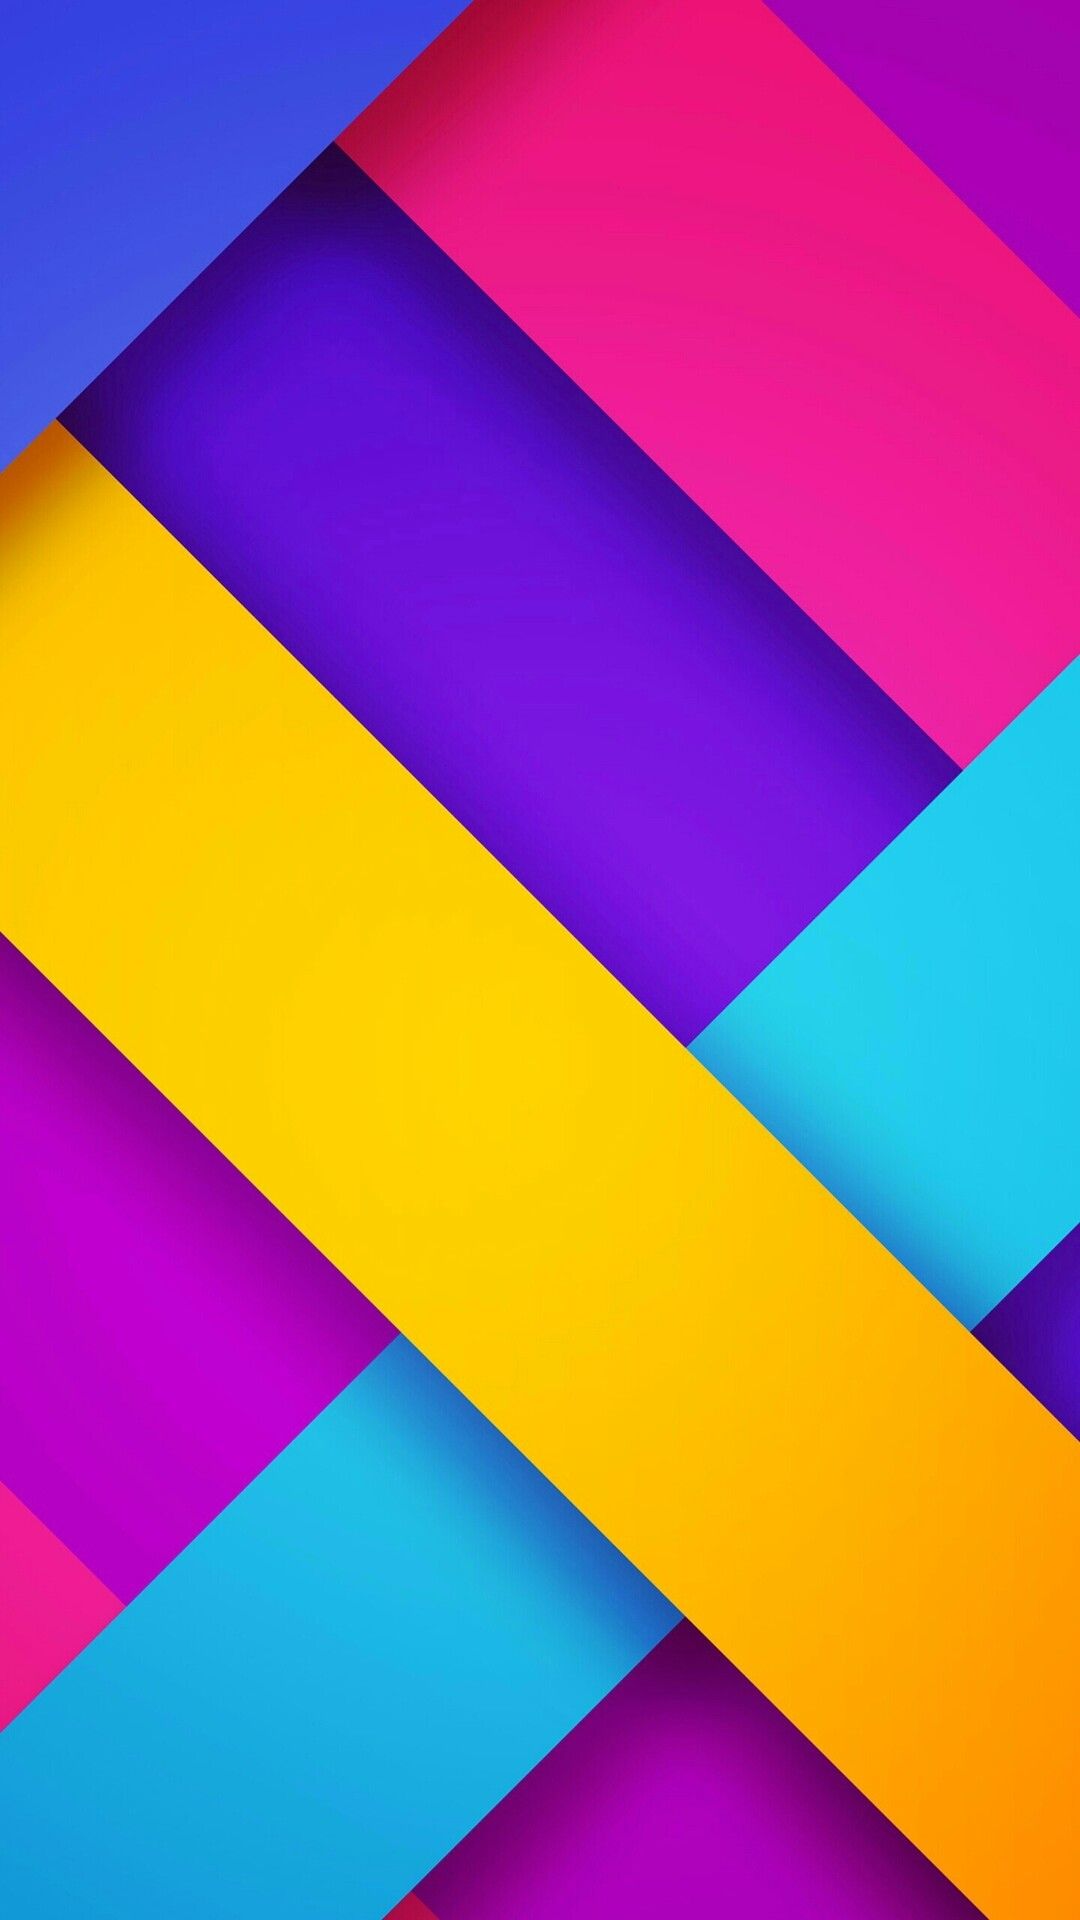 hd colorful wallpapers for mobile,violet,blue,purple,yellow,colorfulness